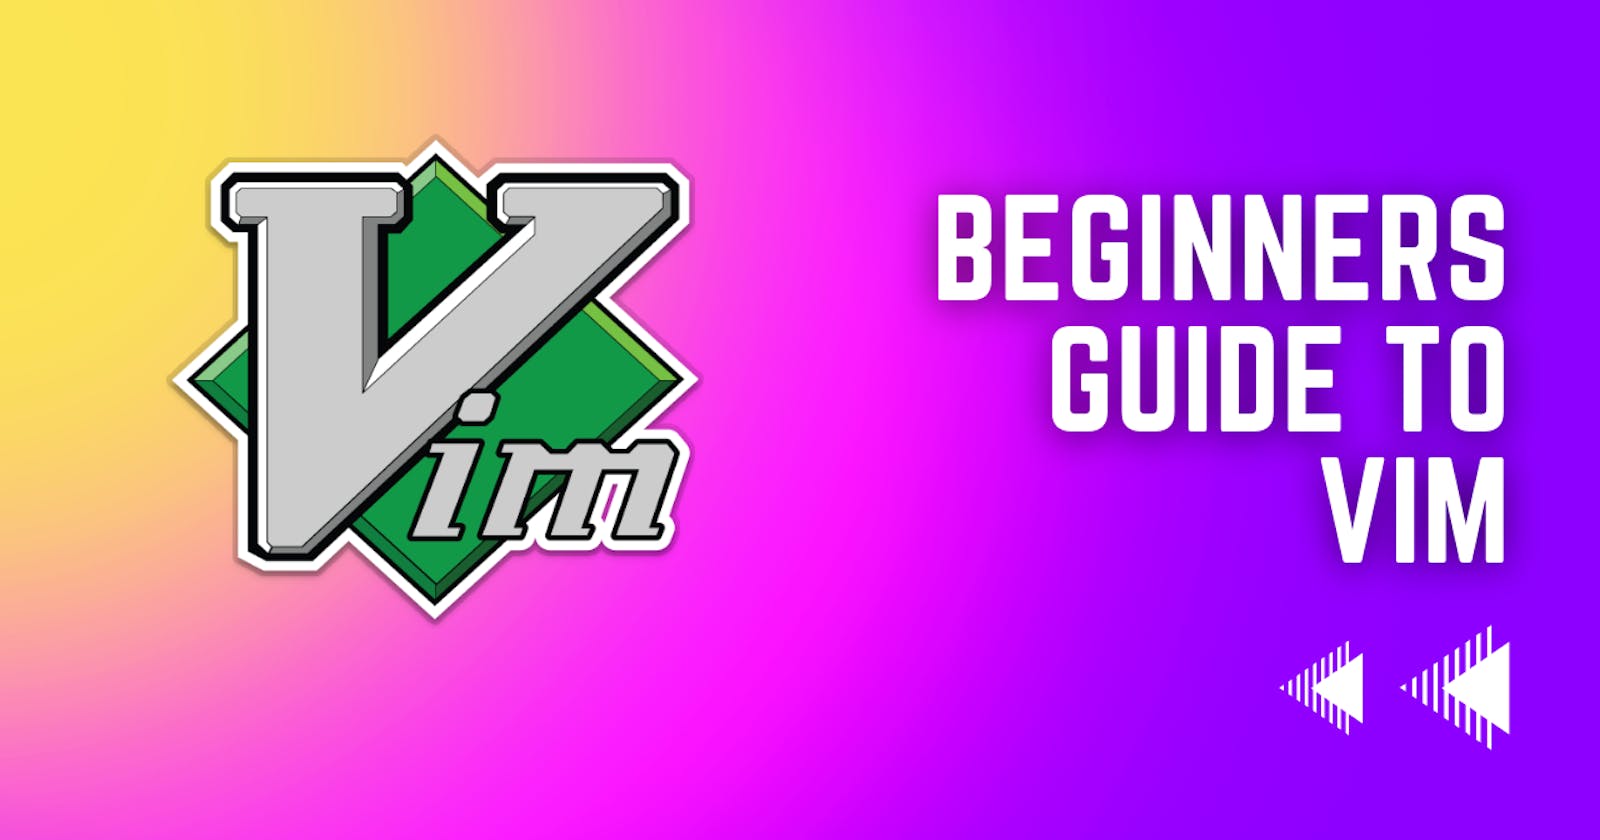 Beginners guide to VIM editor!!